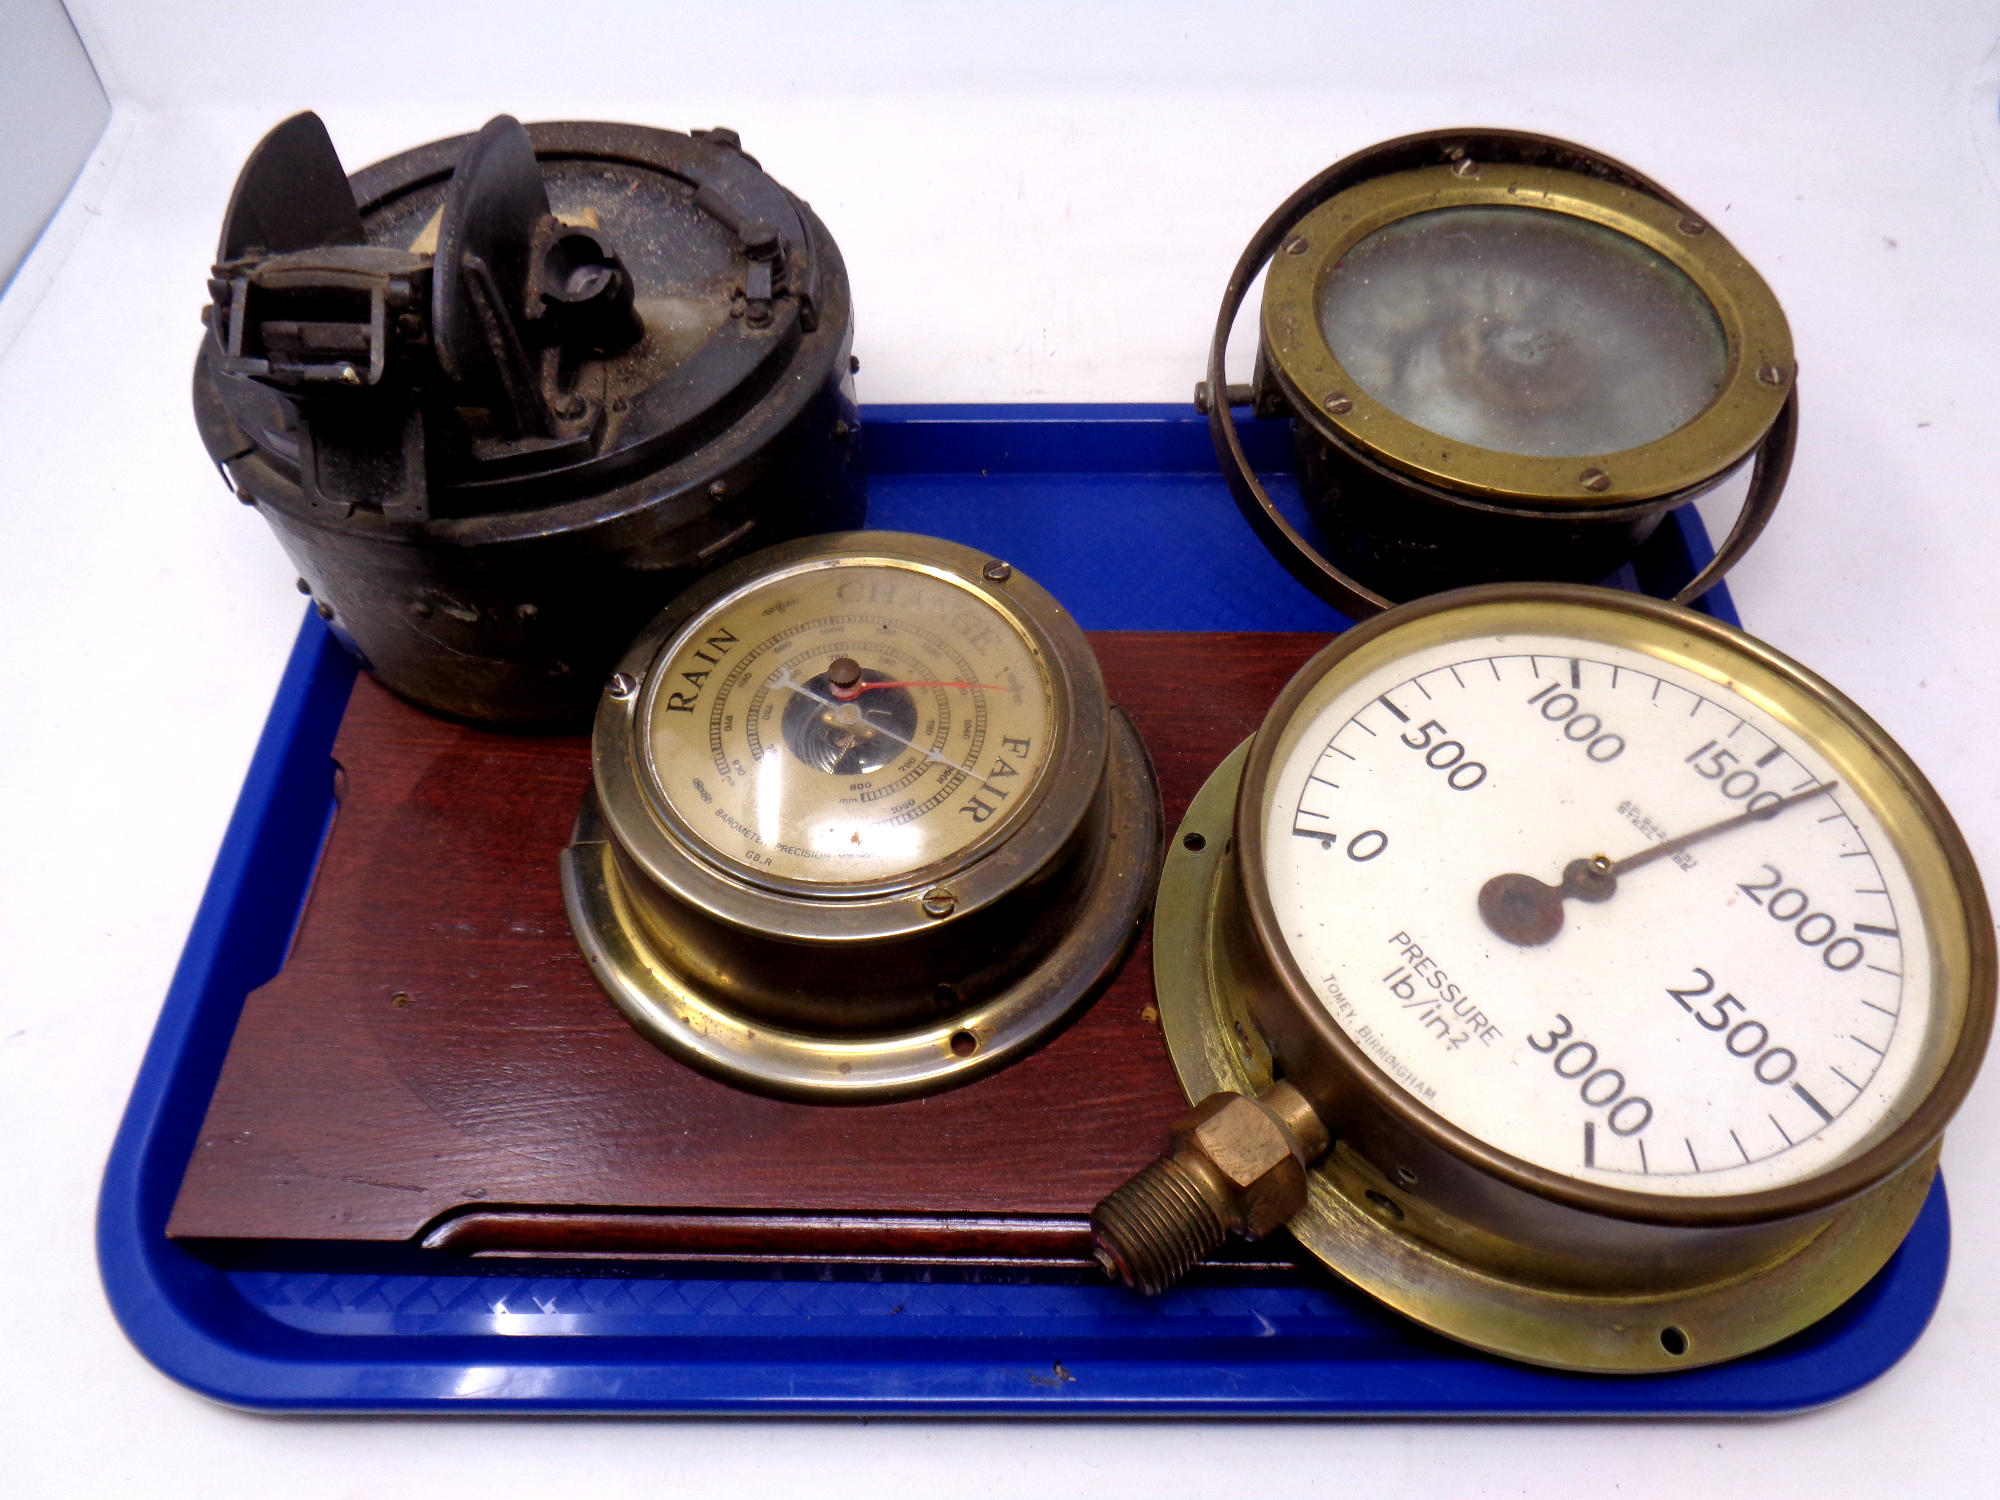 Two vintage ship's compasses together with a brass cased pressure gauge and a brass cased barometer